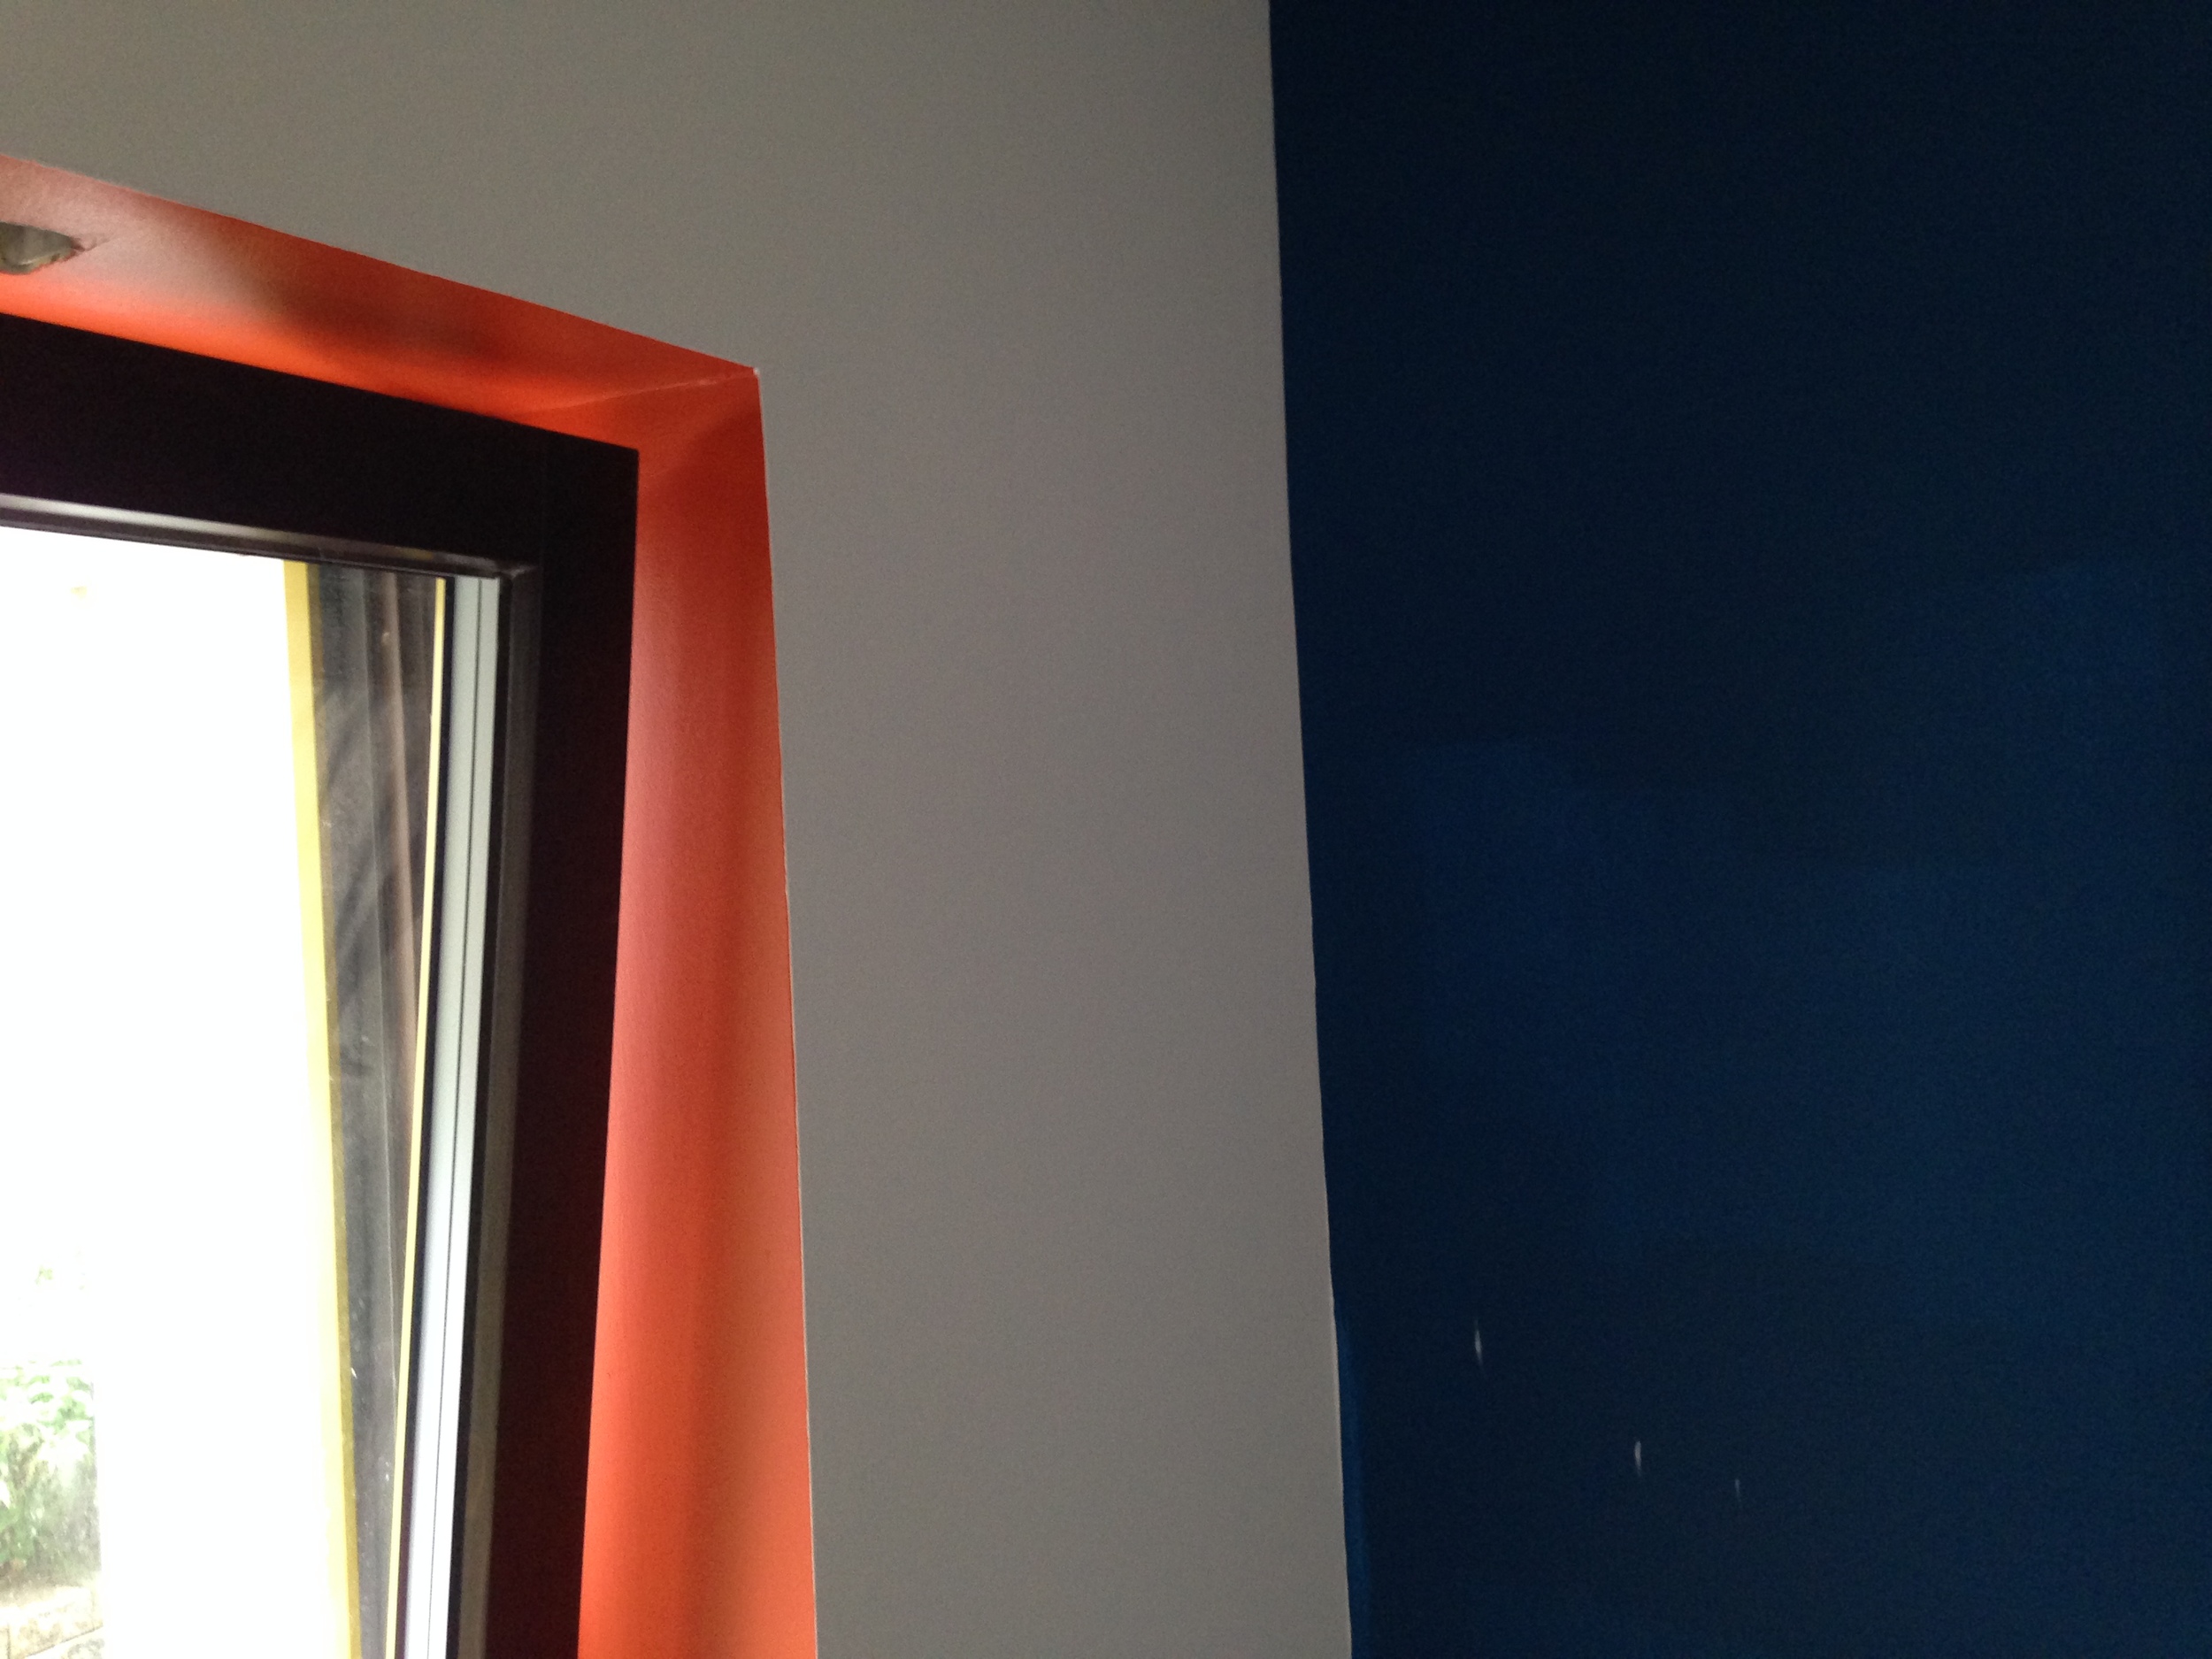  Window seat in the den with a pop of orange.&nbsp; Blue wall will have white shelving/cabinets and the TV 